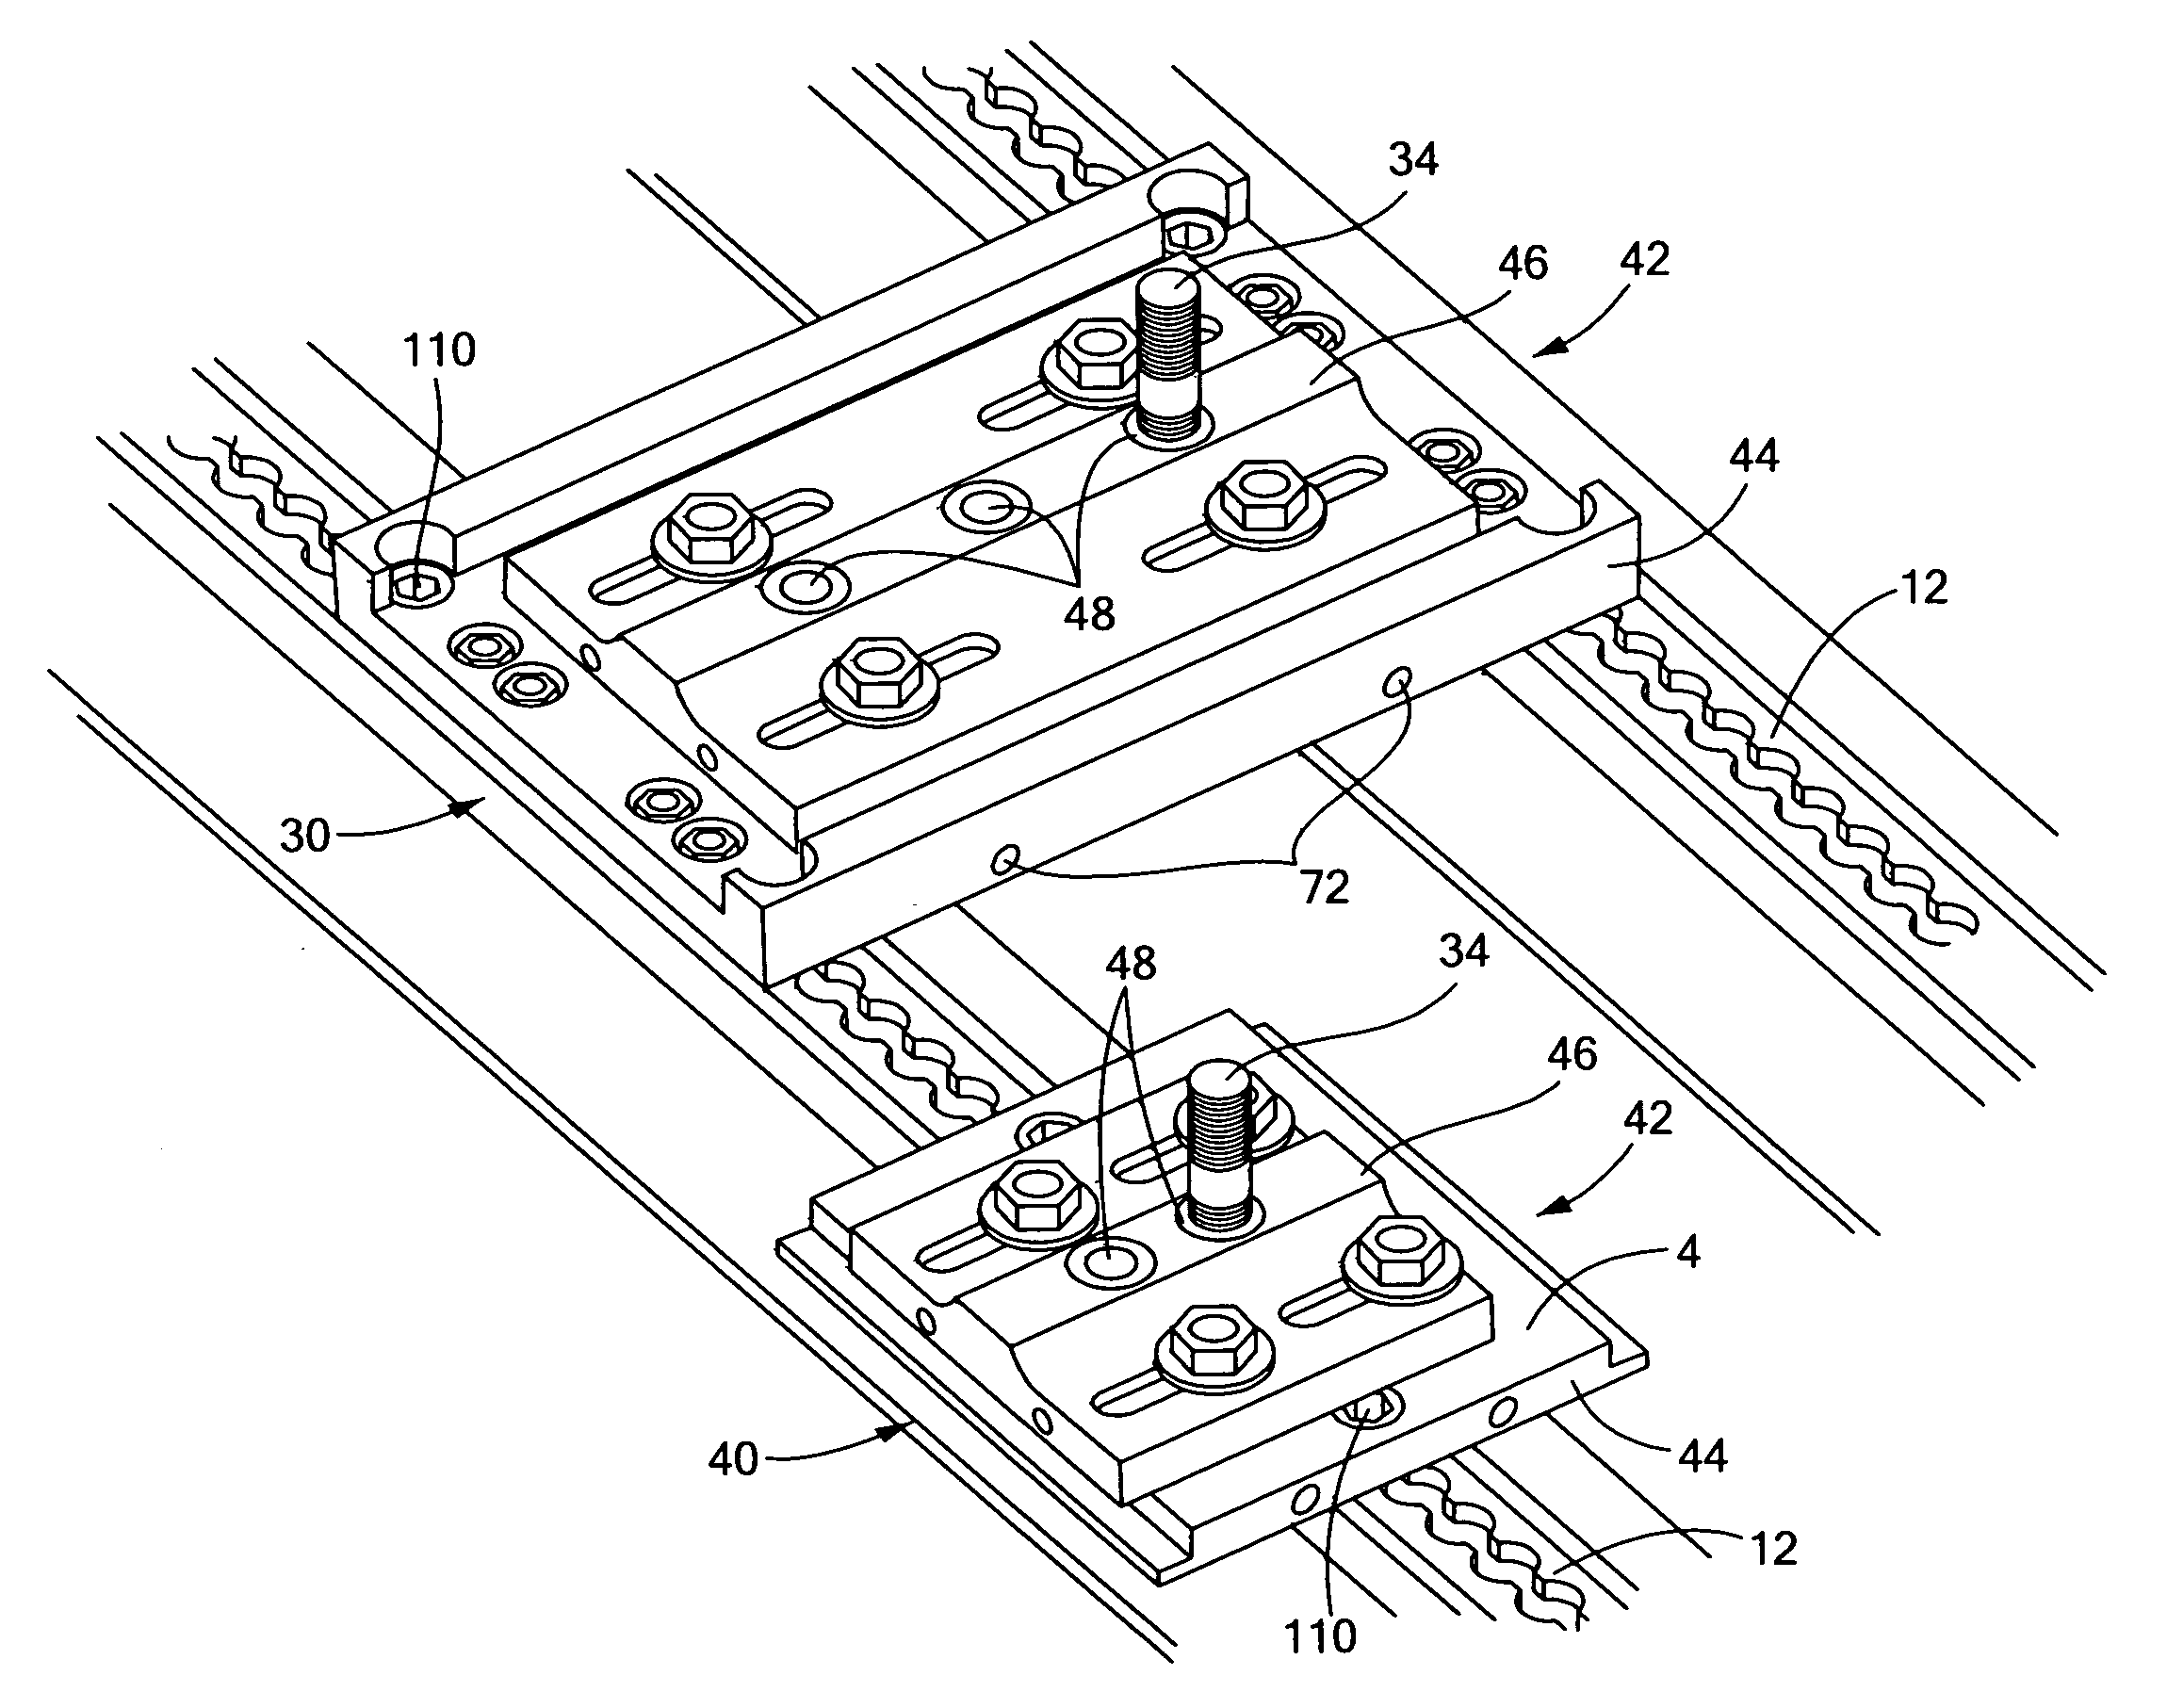 Foundation adapter module and deck tile system